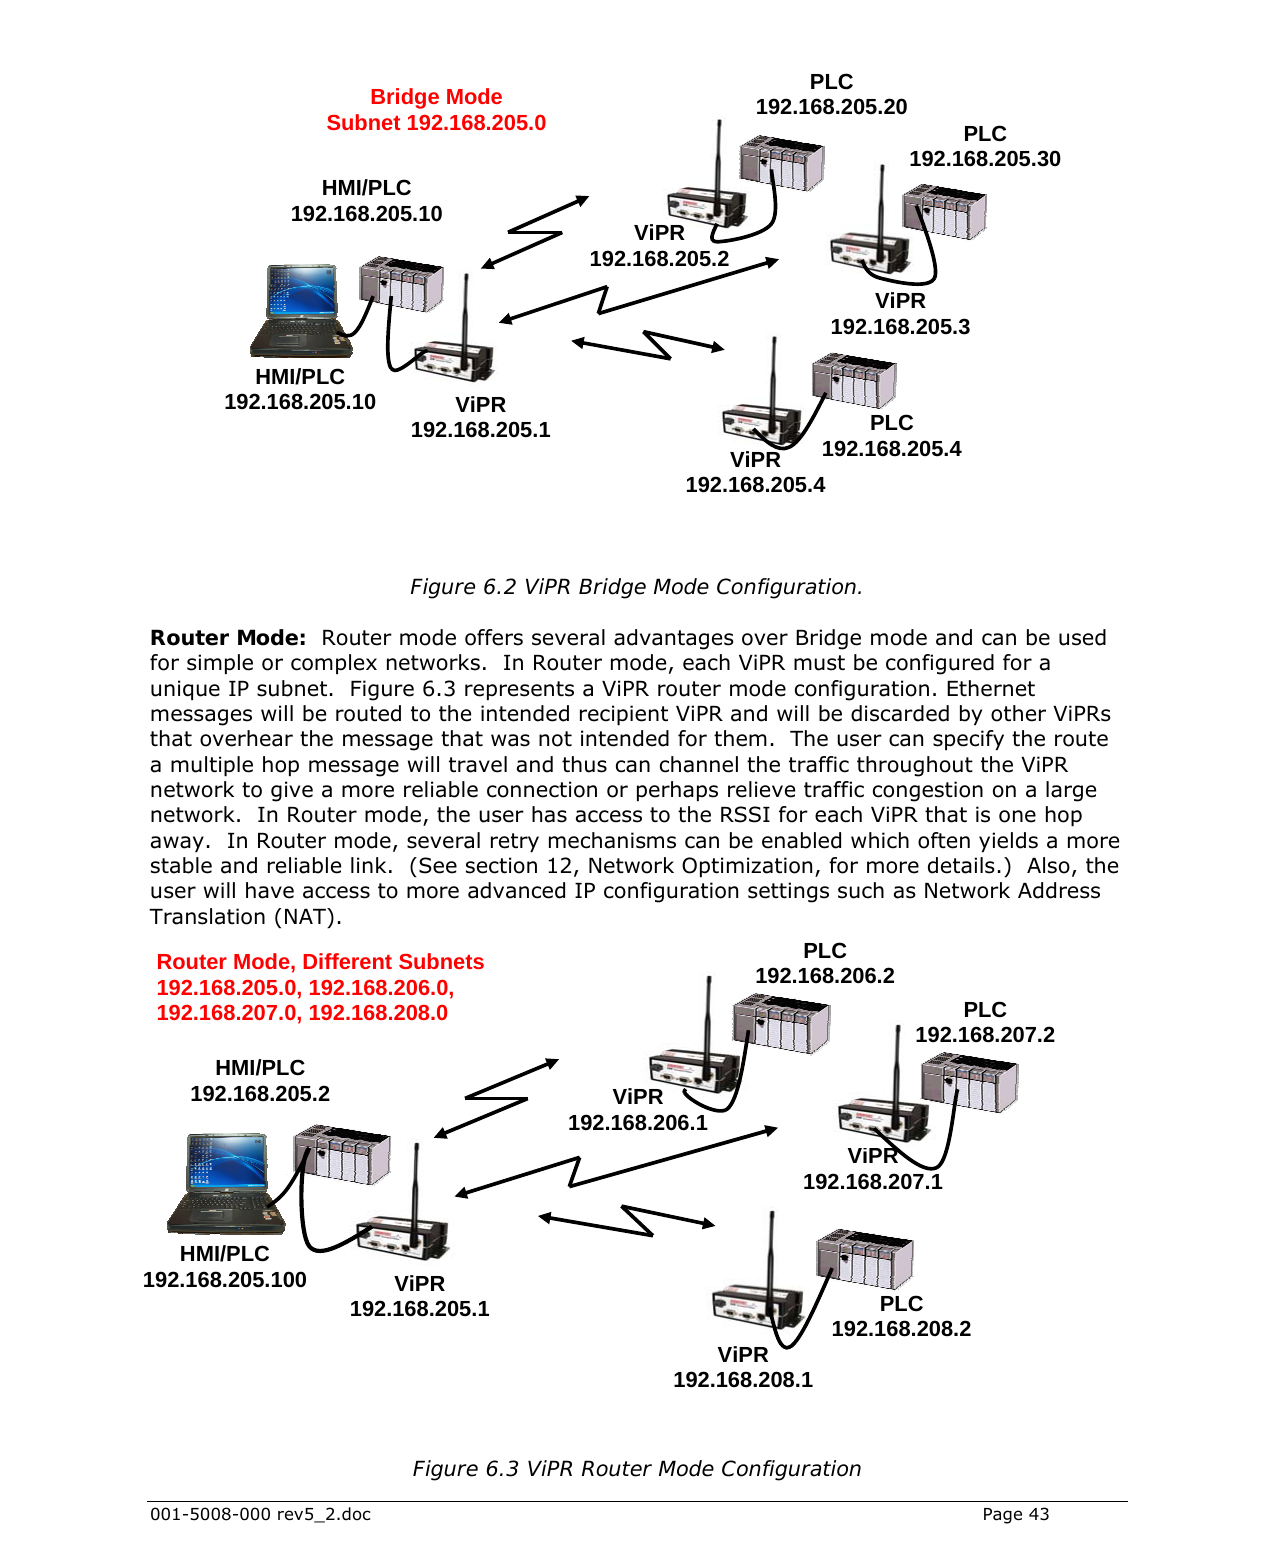  001-5008-000 rev5_2.doc    Page 43  Figure 6.2 ViPR Bridge Mode Configuration.  Router Mode:  Router mode offers several advantages over Bridge mode and can be used for simple or complex networks.  In Router mode, each ViPR must be configured for a unique IP subnet.  Figure 6.3 represents a ViPR router mode configuration. Ethernet messages will be routed to the intended recipient ViPR and will be discarded by other ViPRs that overhear the message that was not intended for them.  The user can specify the route a multiple hop message will travel and thus can channel the traffic throughout the ViPR network to give a more reliable connection or perhaps relieve traffic congestion on a large network.  In Router mode, the user has access to the RSSI for each ViPR that is one hop away.  In Router mode, several retry mechanisms can be enabled which often yields a more stable and reliable link.  (See section 12, Network Optimization, for more details.)  Also, the user will have access to more advanced IP configuration settings such as Network Address Translation (NAT).  Figure 6.3 ViPR Router Mode ConfigurationViPR 192.168.205.1 ViPR 192.168.205.3 PLC 192.168.205.4HMI/PLC 192.168.205.10 HMI/PLC 192.168.205.10PLC 192.168.205.30 PLC 192.168.205.20 ViPR 192.168.205.2 ViPR 192.168.205.4 Bridge Mode Subnet 192.168.205.0 ViPR 192.168.205.1 ViPR 192.168.207.1 ViPR 192.168.208.1 PLC 192.168.208.2 HMI/PLC 192.168.205.2 HMI/PLC 192.168.205.100 PLC 192.168.207.2PLC 192.168.206.2 ViPR 192.168.206.1 Router Mode, Different Subnets  192.168.205.0, 192.168.206.0, 192.168.207.0, 192.168.208.0 